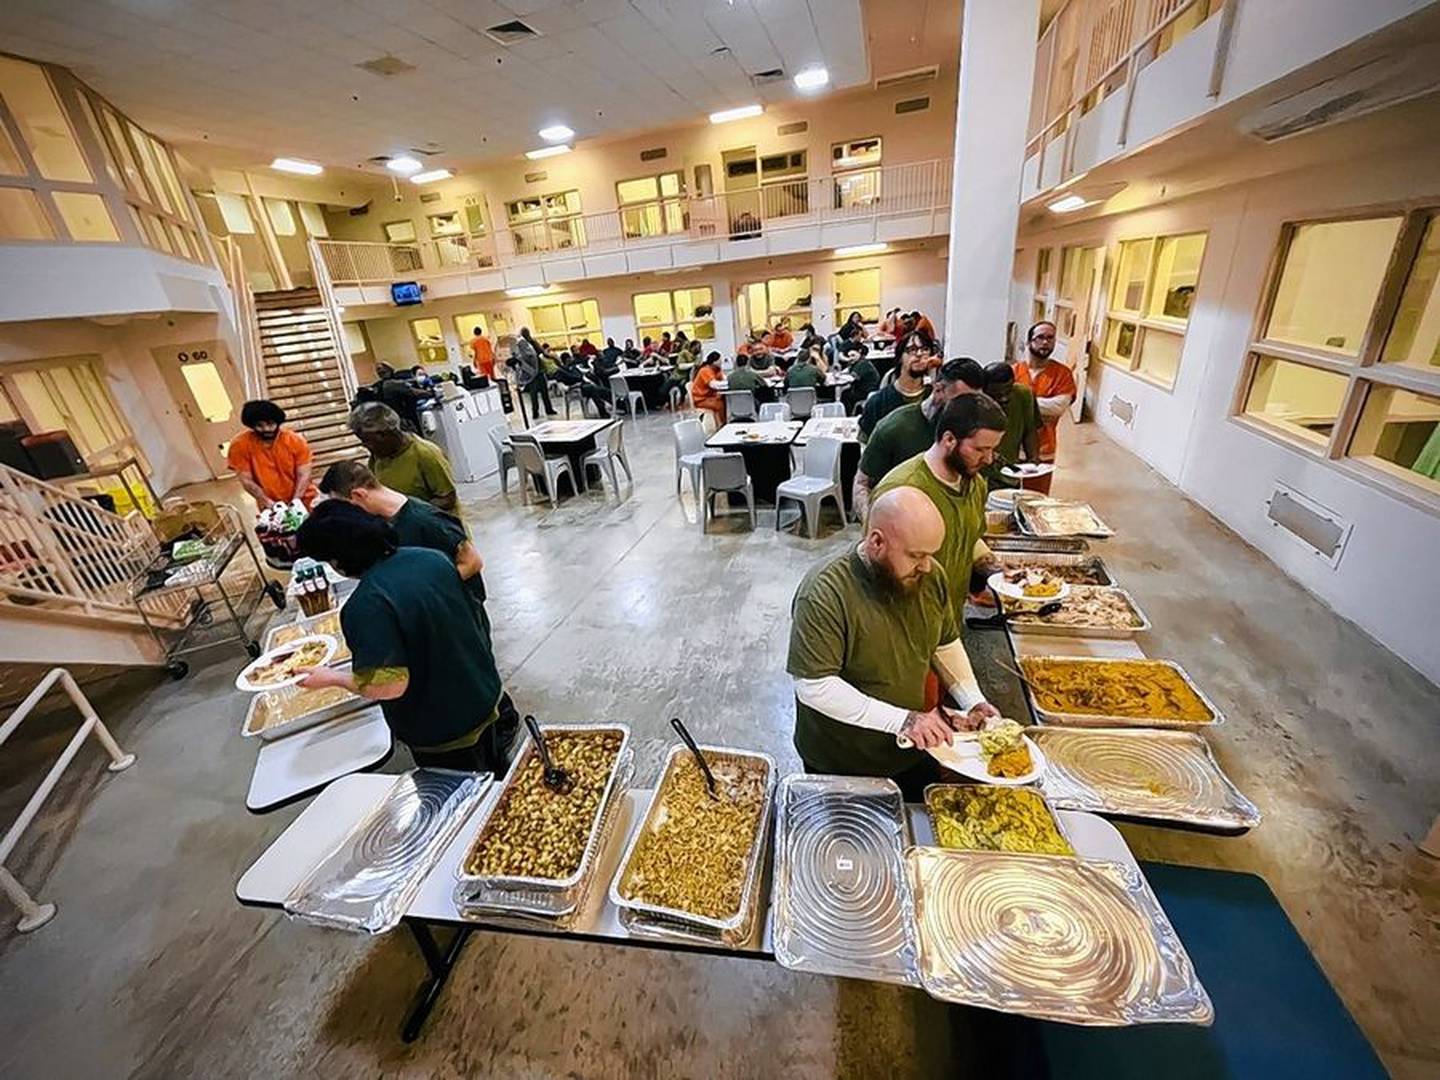 Last year, detainees in the Kane County jail's substance-abuse recovery pod received a Thanksgiving meal donated by St. Charles caterer Quenby Schuyler.